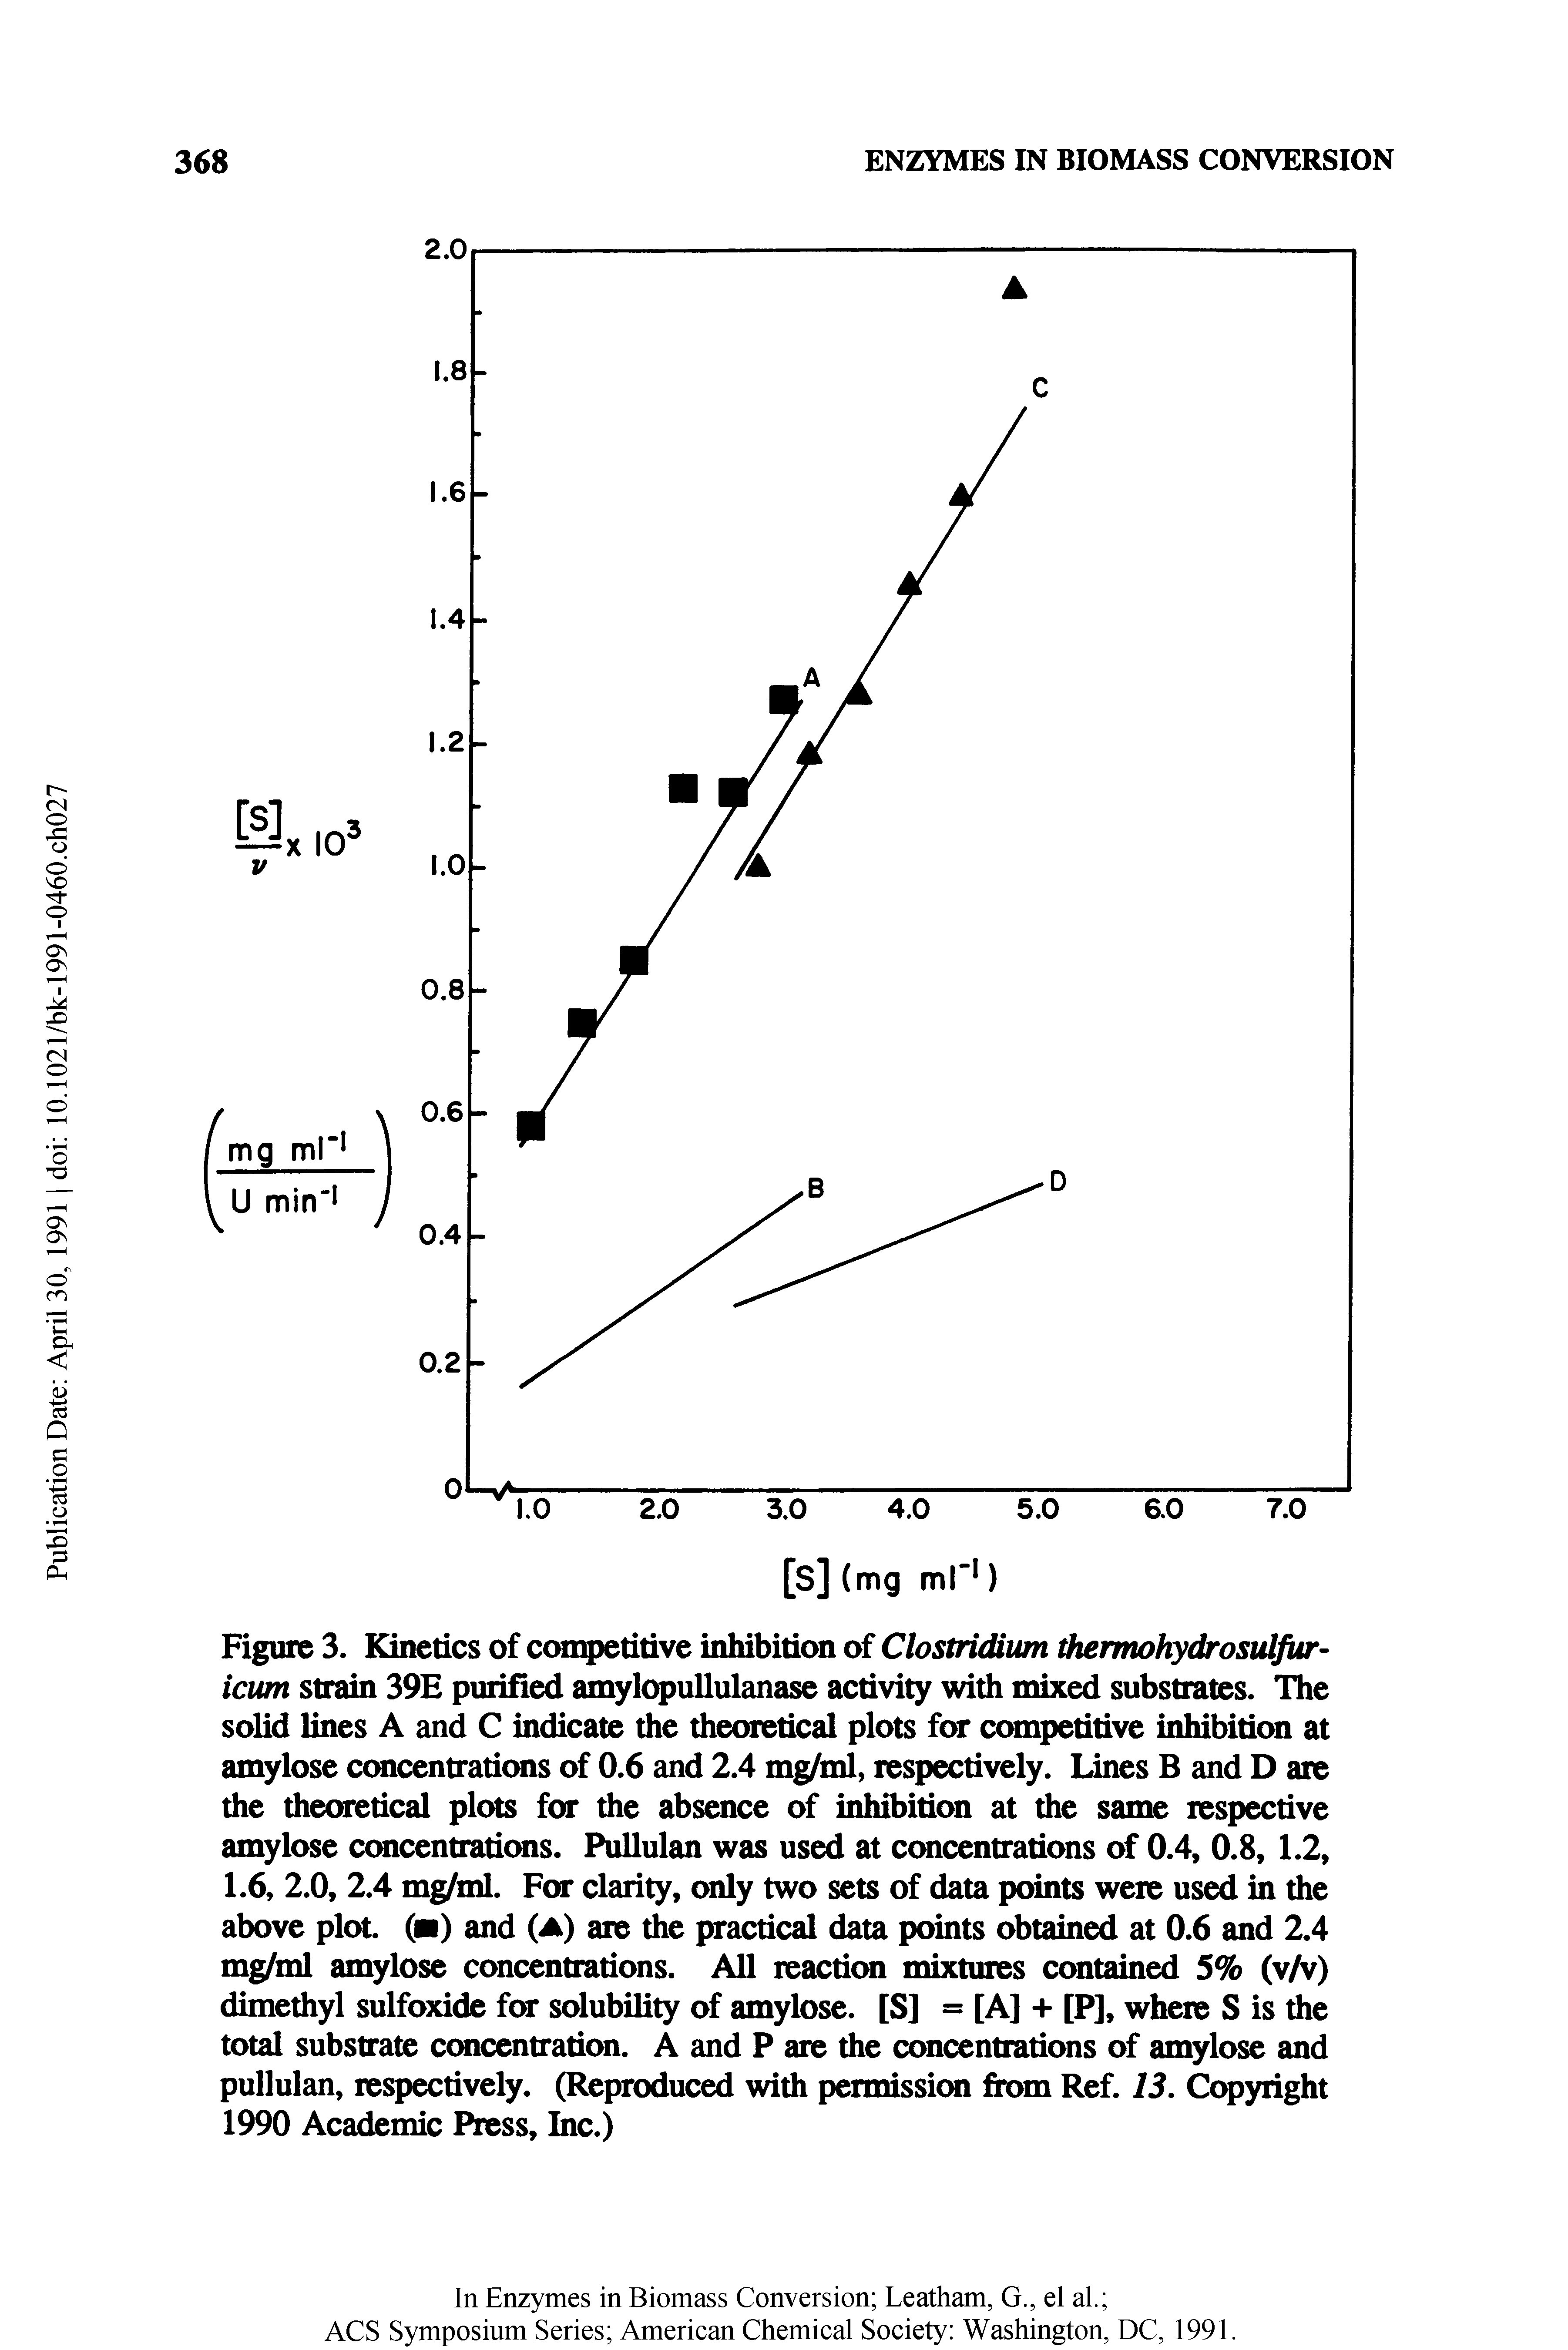 Figure 3. Kinetics of conq)etitivc inhibition of Clostridium thermohydrosuljur-icum strain 39E purified amylopuUulanase activity with mixed substrates. The solid lines A and C indicate the theoretical plots for competitive inhibition at amylose ccmcentrations of 0.6 and 2.4 mg/ml, respectively. Lines B and D are the theoretical plots for the absence of inhibition at the same respective amylose ccmcentrations. PuUulan was used at concentrations of 0.4, 0.8, 1.2, 1.6, 2.0, 2.4 mg/ml. For clarity, only two sets of data points were used in the above plot. ( ) and (A) are the practical data points obtained at 0.6 and 2.4 mg/ml amylose concentrations. All reaction mixtures contained 5% (v/v) dimethyl sulfoxide for solubility of amylose. [S] = [A] + [P], where S is the total substrate ccmcentration. A and P are the concentrations of amylose and pullulan, respectively. (Reproduced with permissiem from Ref. 13. Copyright 1990 Academic Press, Inc.)...